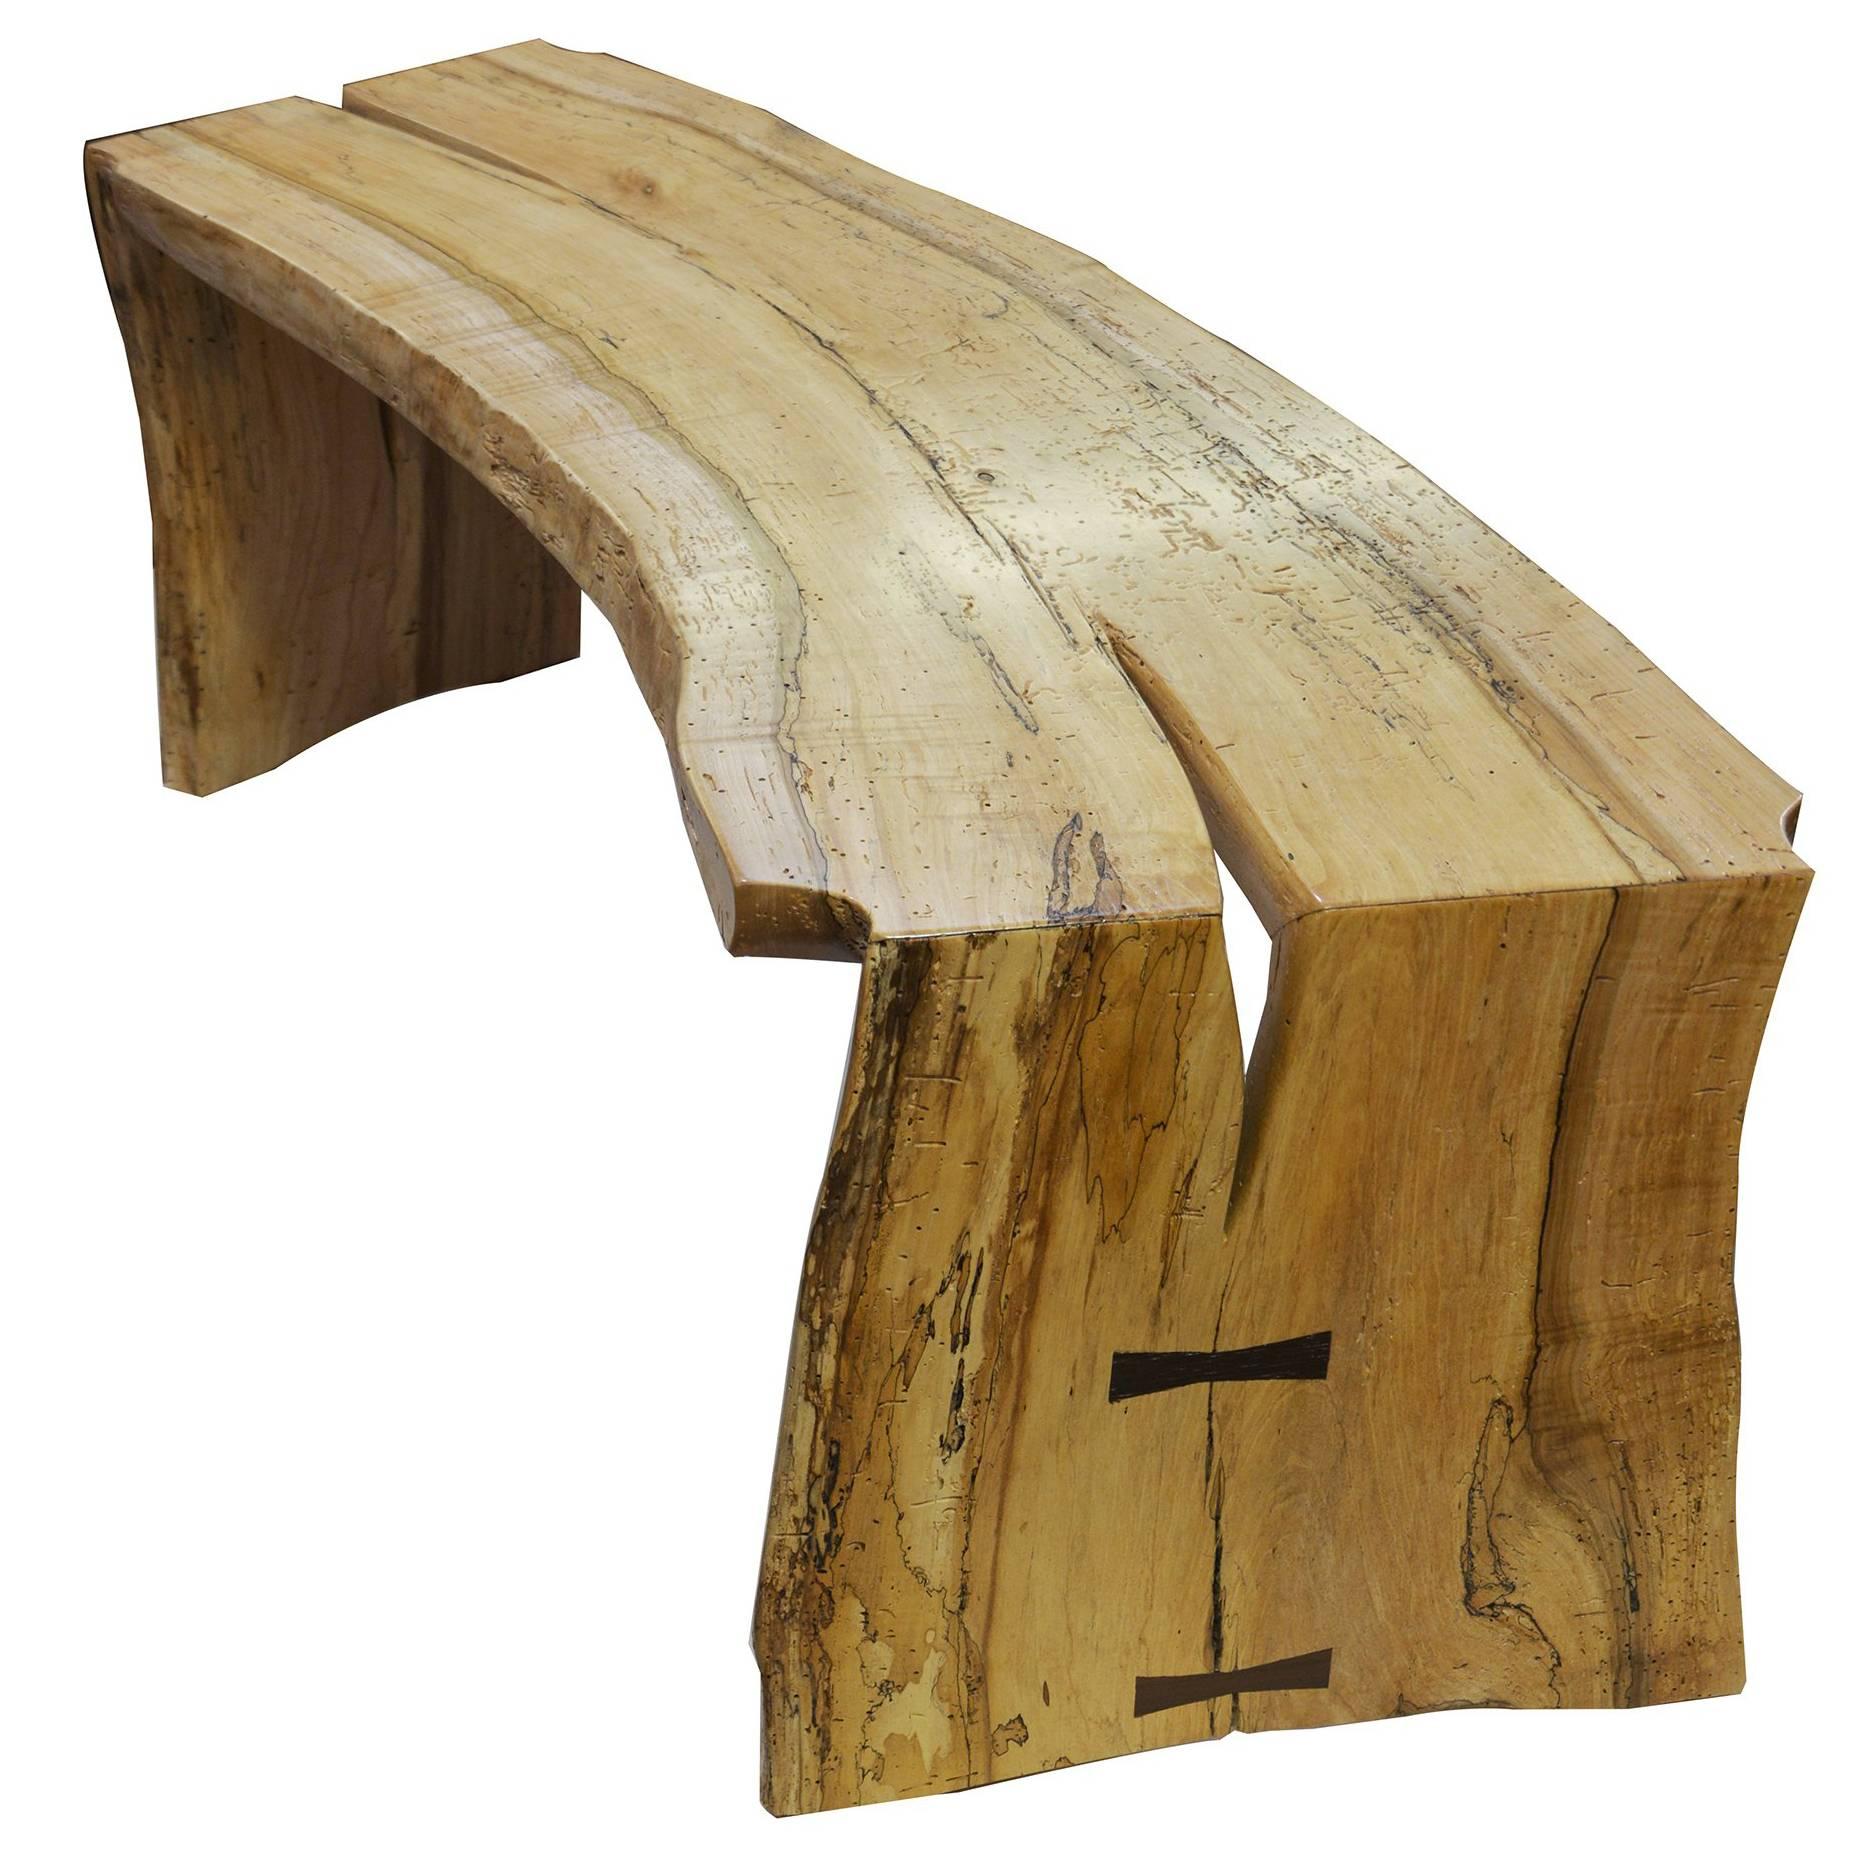 The David Ebner Free Edge Spalted Maple Bench For Sale